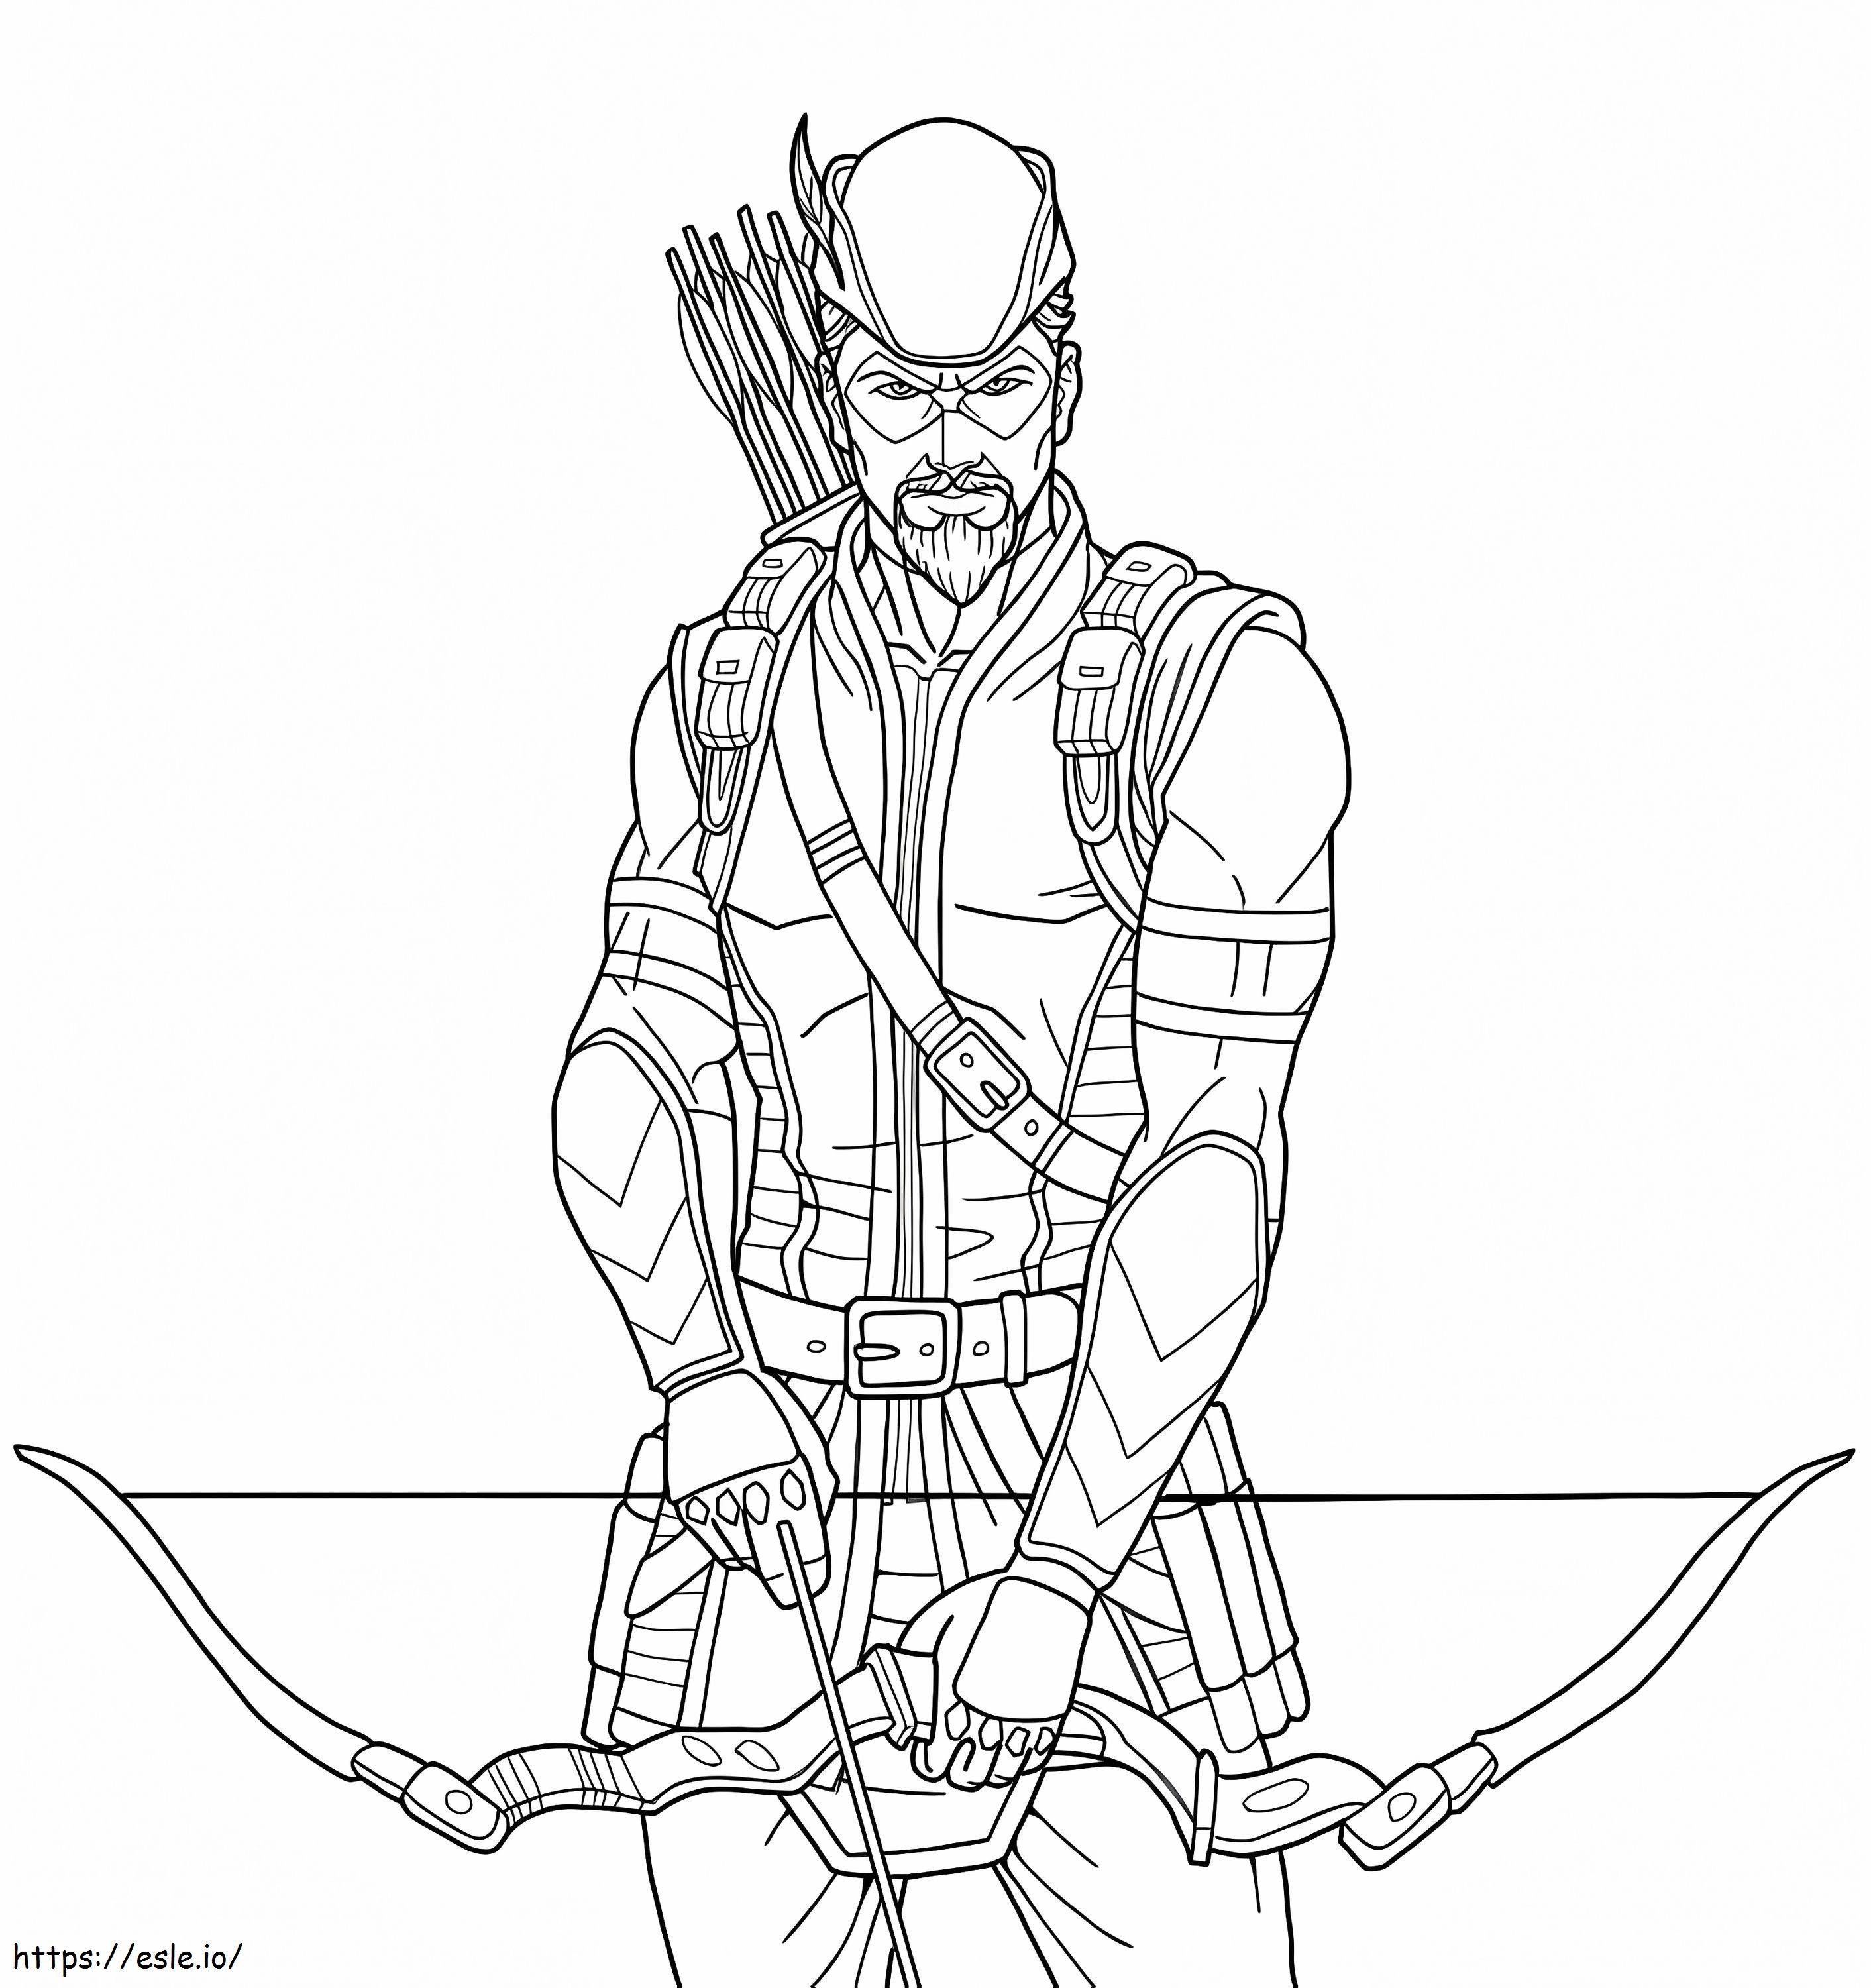 Awesome Green Arrow coloring page